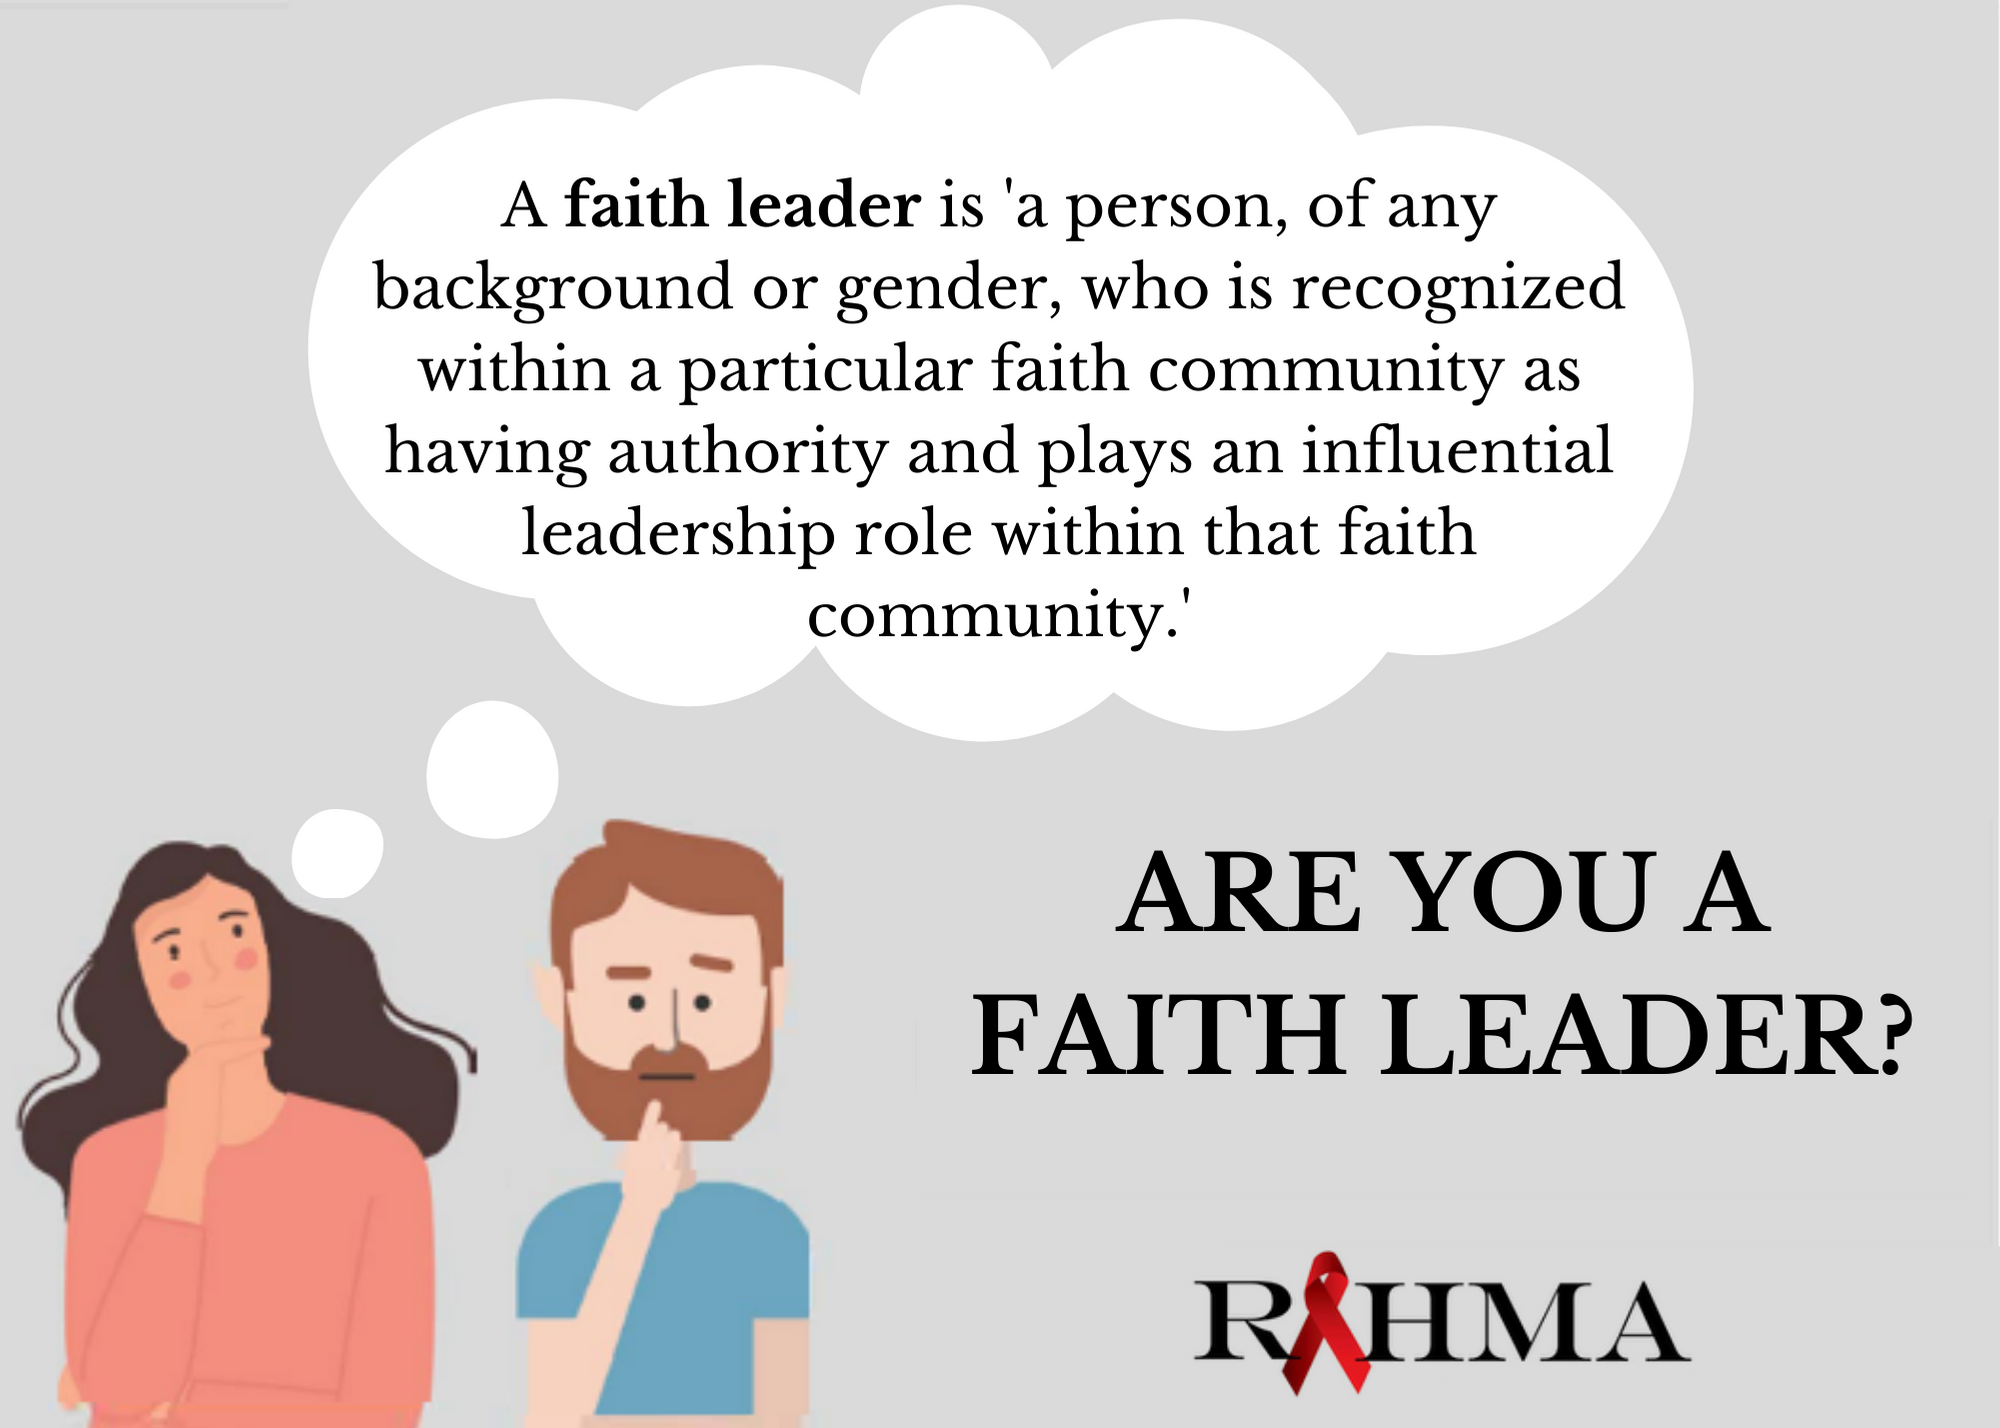 A faith leader is 'A person, of any background or gender, who is recognied within a particular faith community as having authority and plays an influential leadership role within that faith community' (2)_0.png